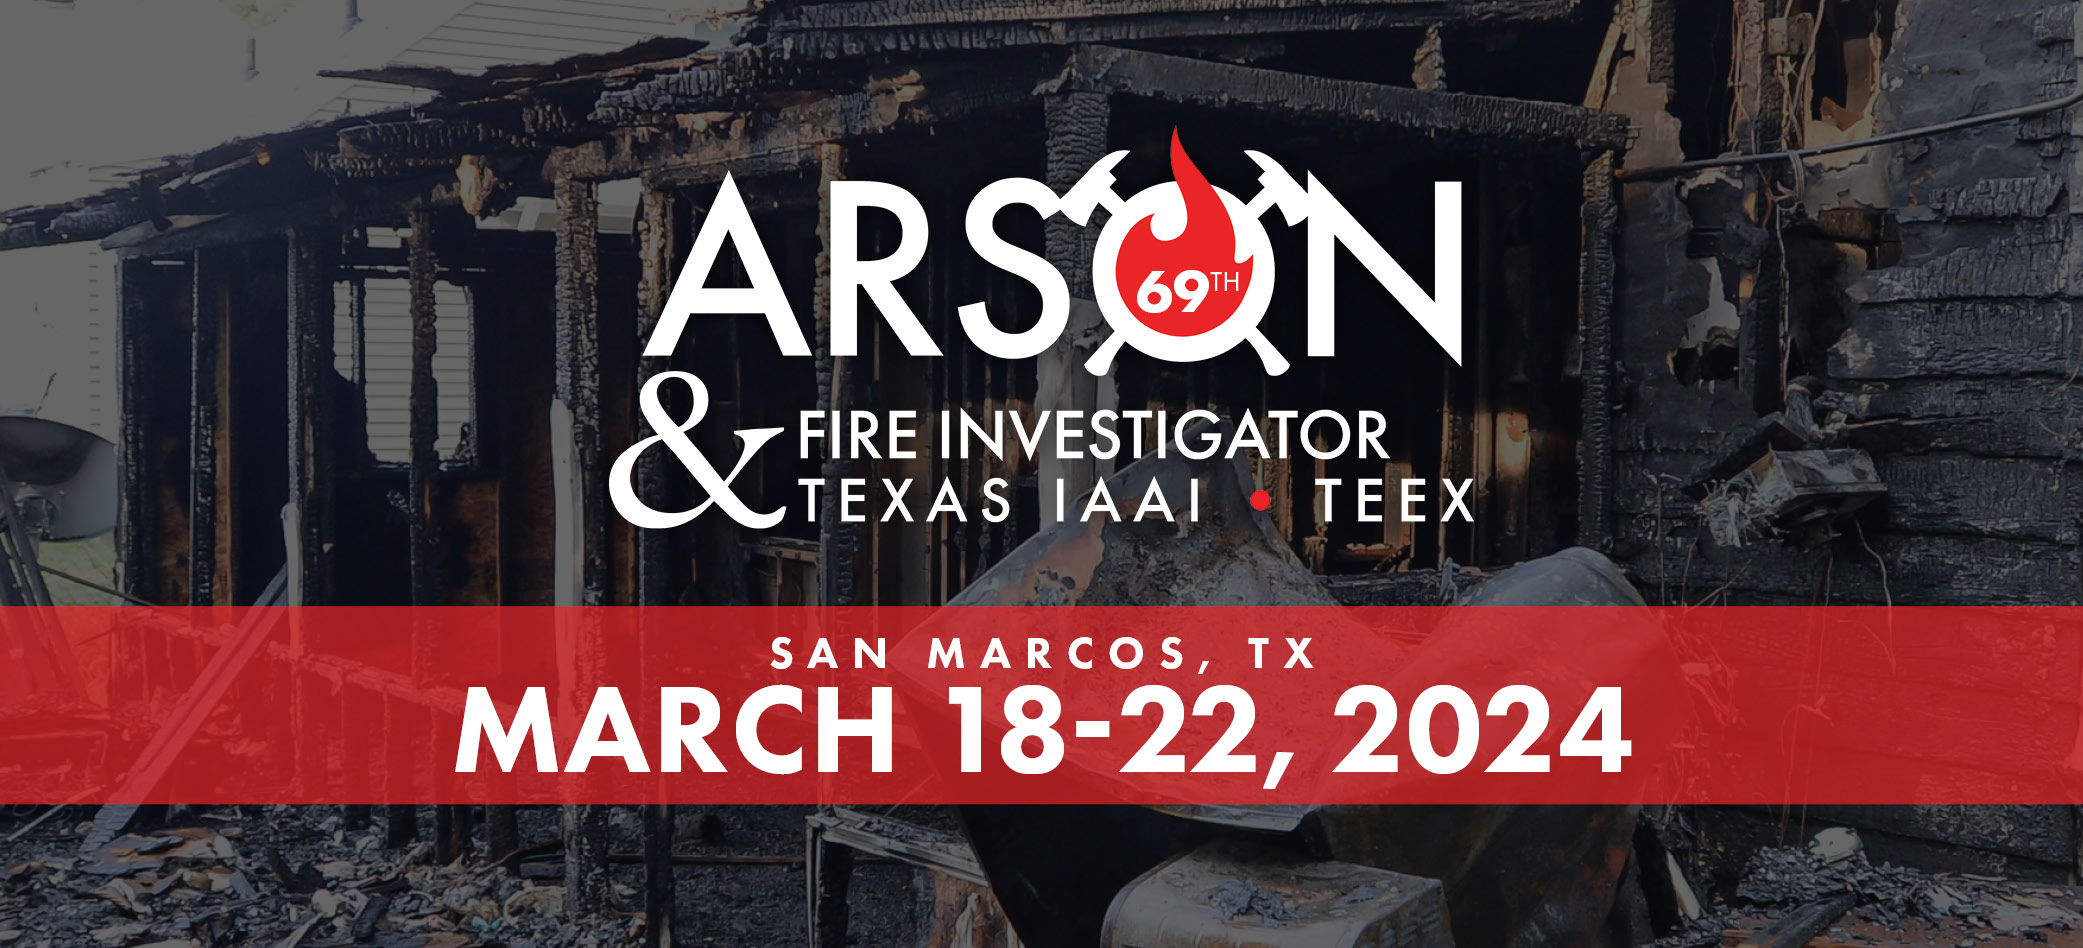 Arson & Fire Investigator logo - house on fire - New Location for 2023 at the San Marcos, TX Embassy Suites